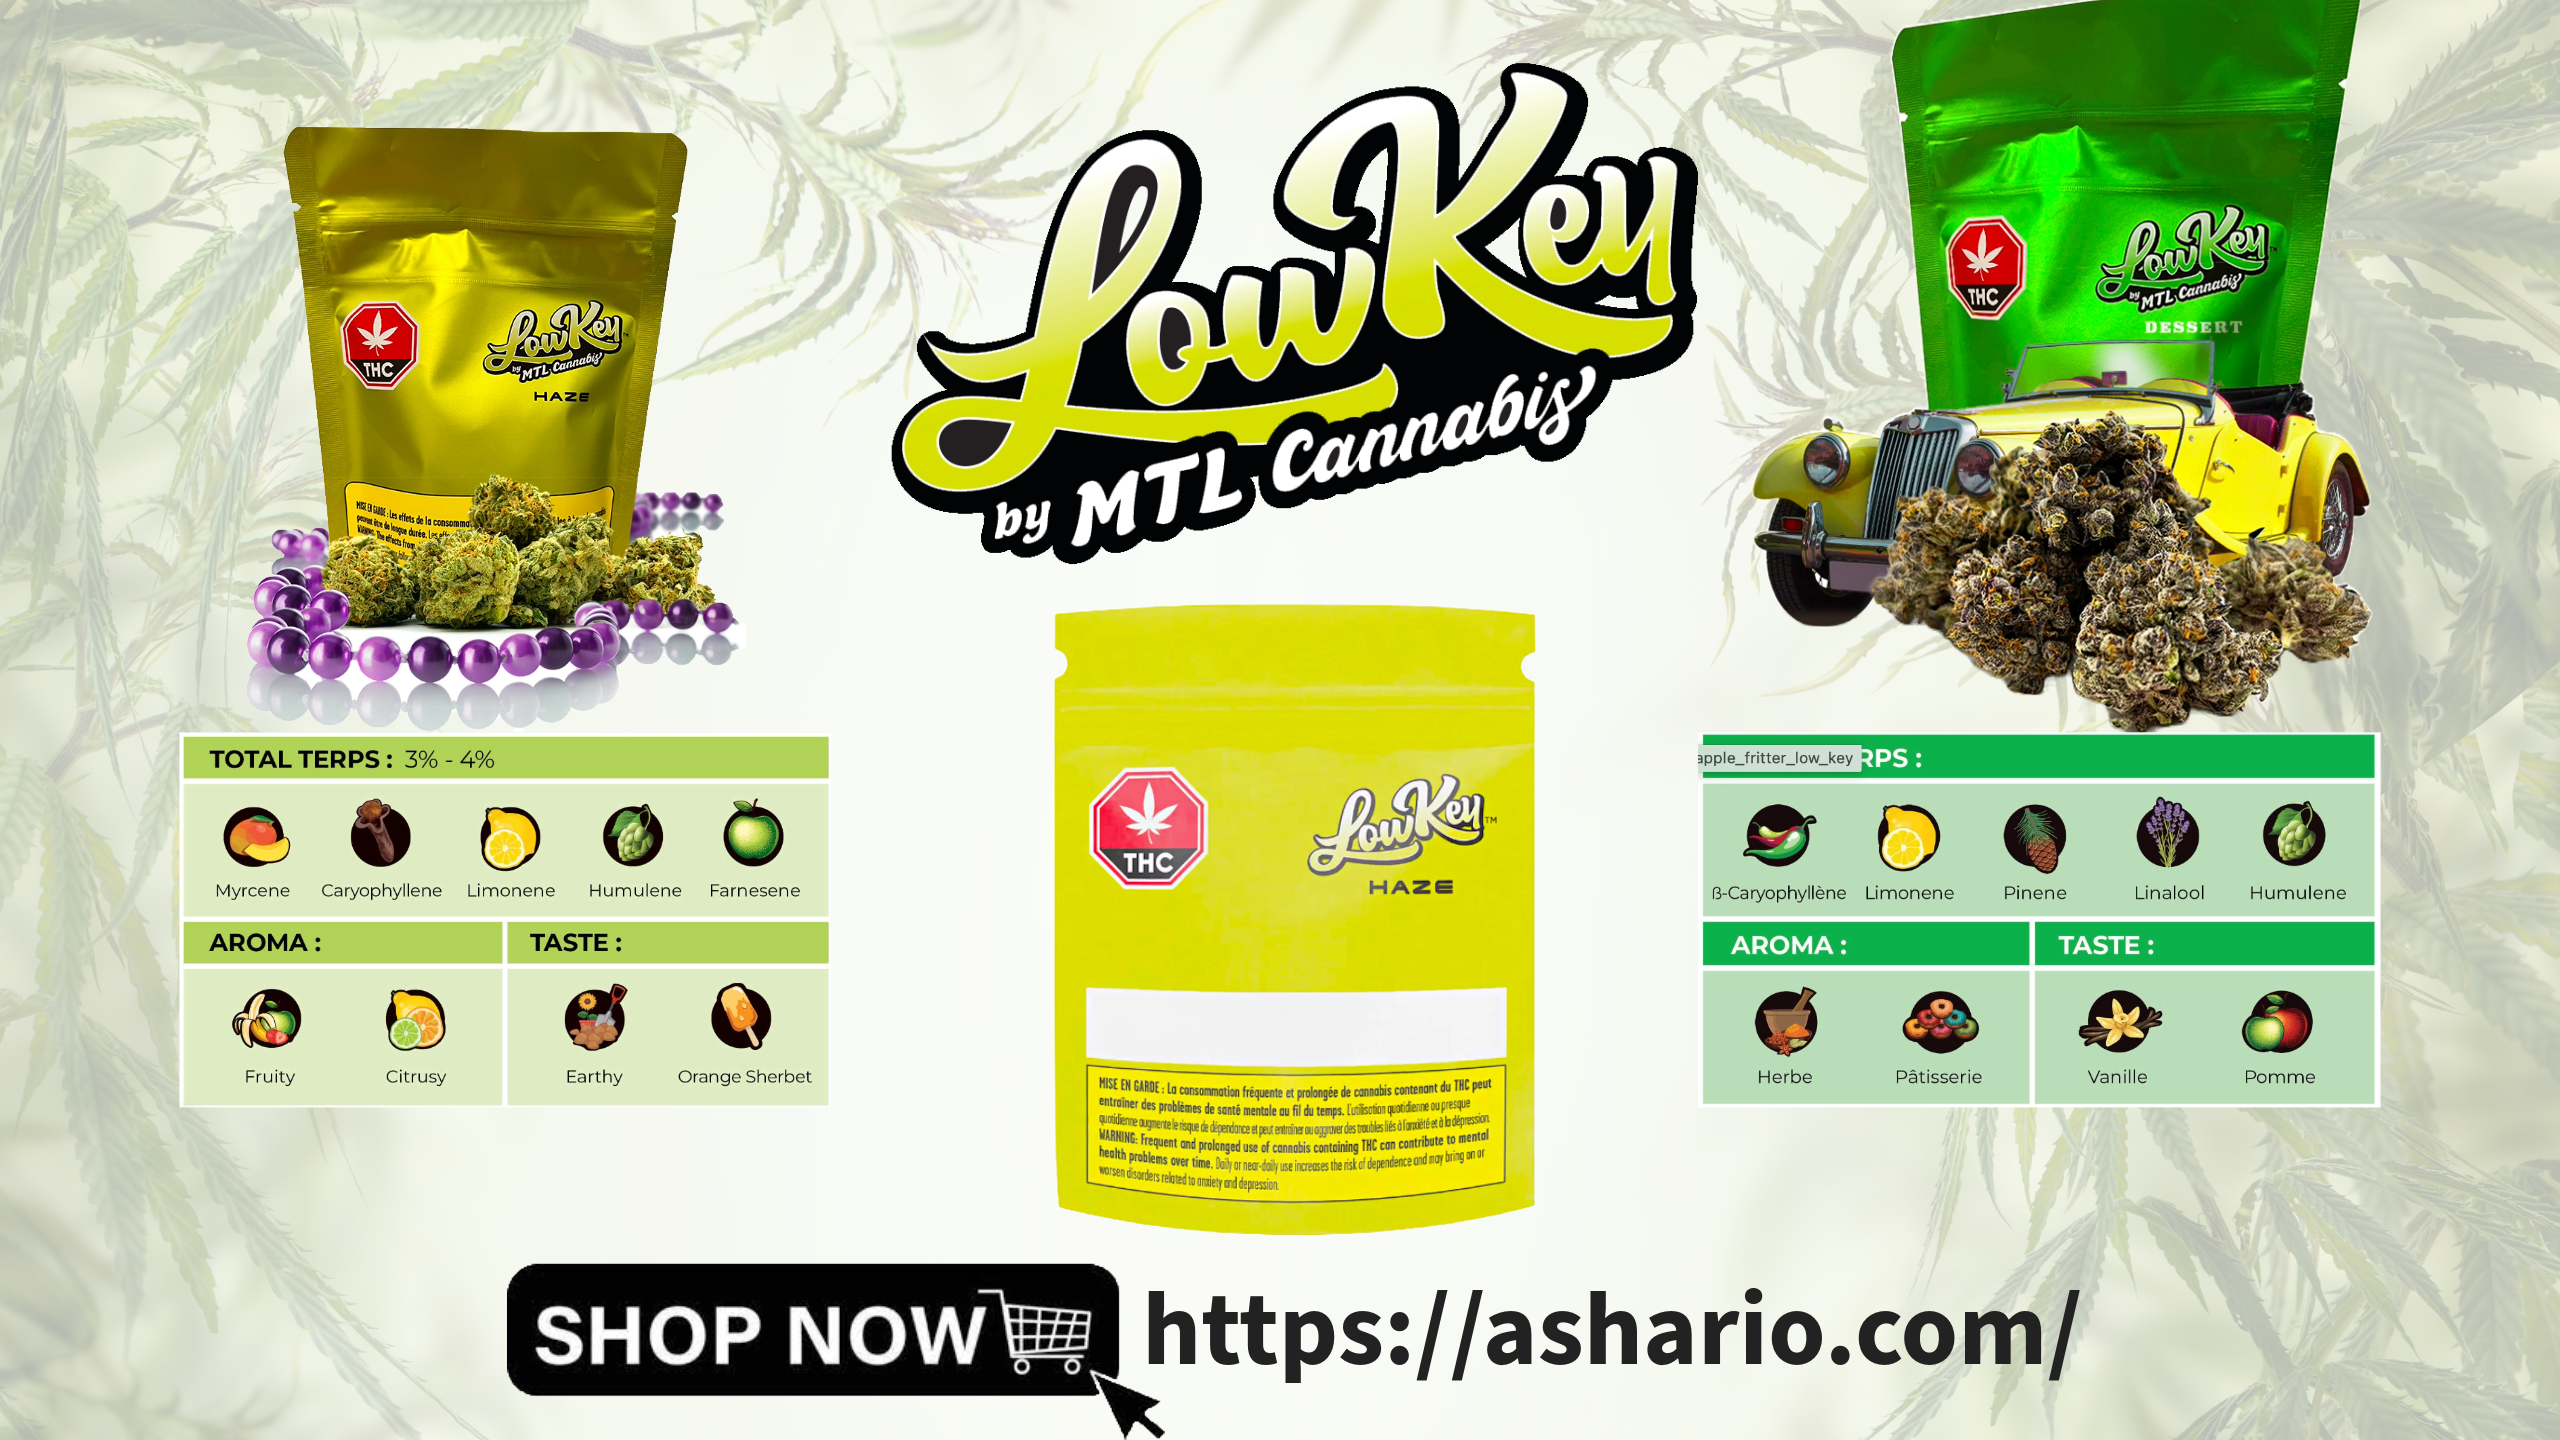 Unlock the world of quality cannabis at an affordable price with Lowkey by MTL Cannabis, exclusively available at Ashario Cannabis.